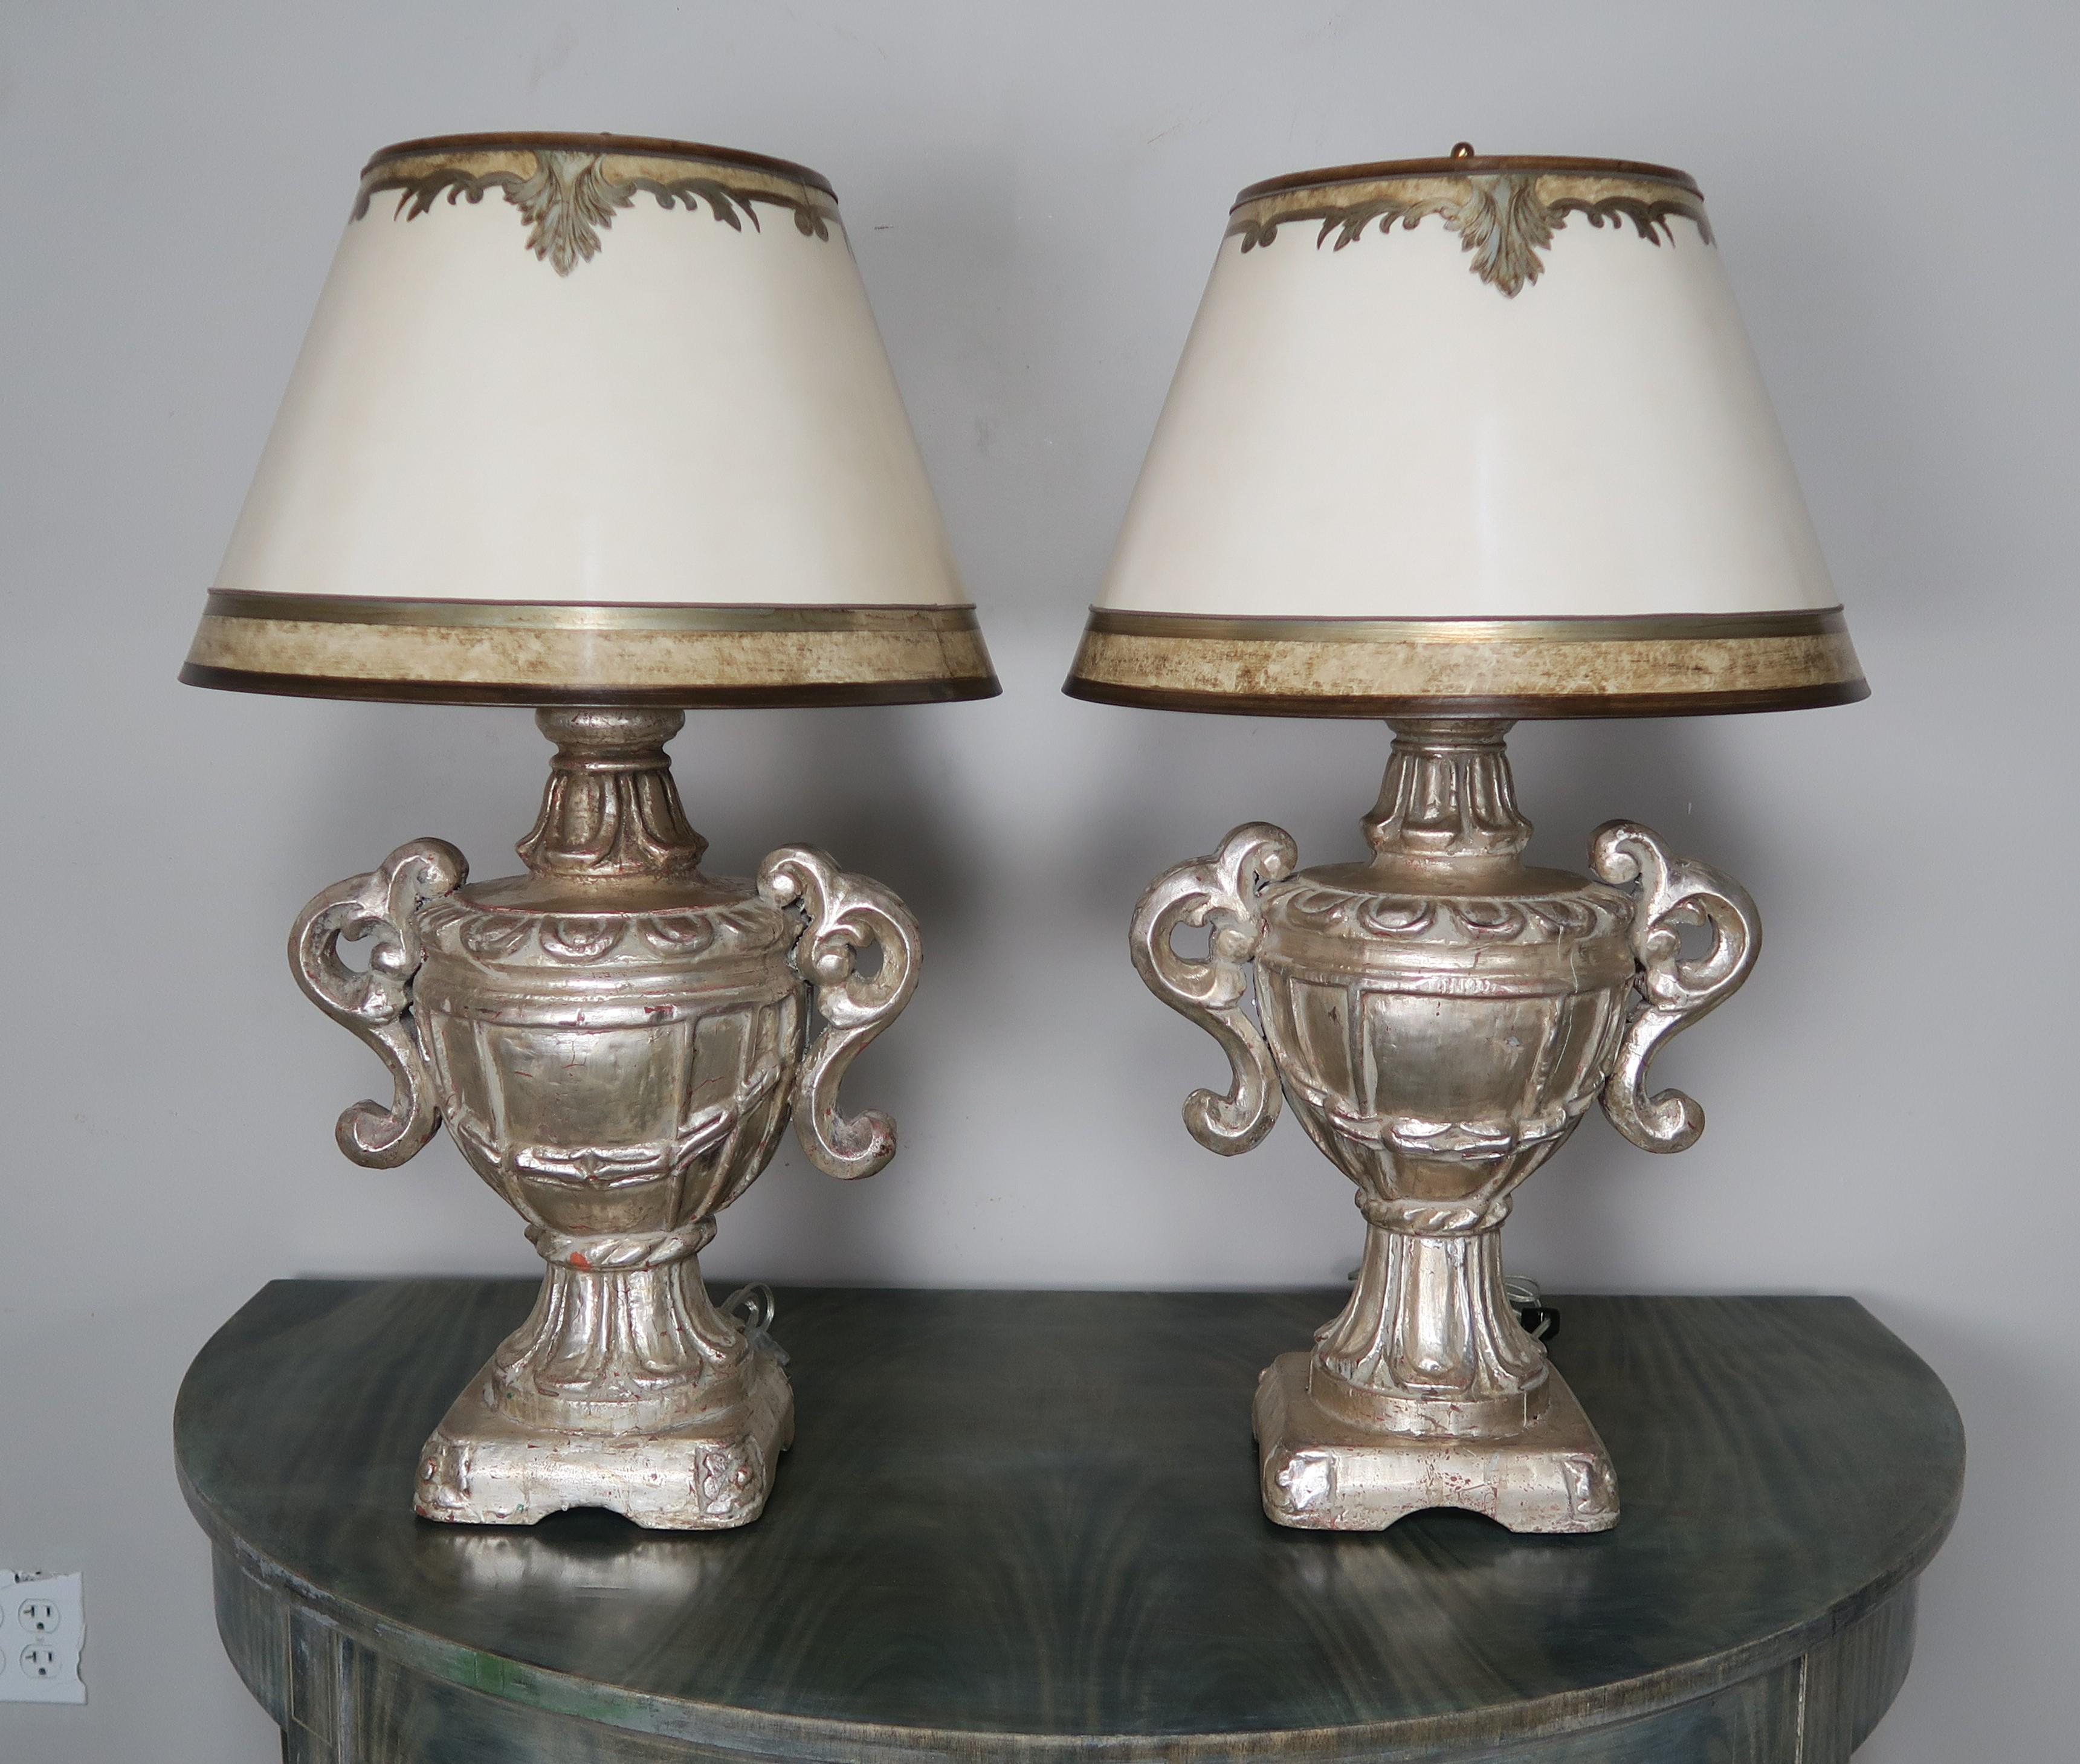 Italian carved wood silvered urn lamps with custom hand-painted parchment shades. The silver urns have been newly rewired and are in working condition.